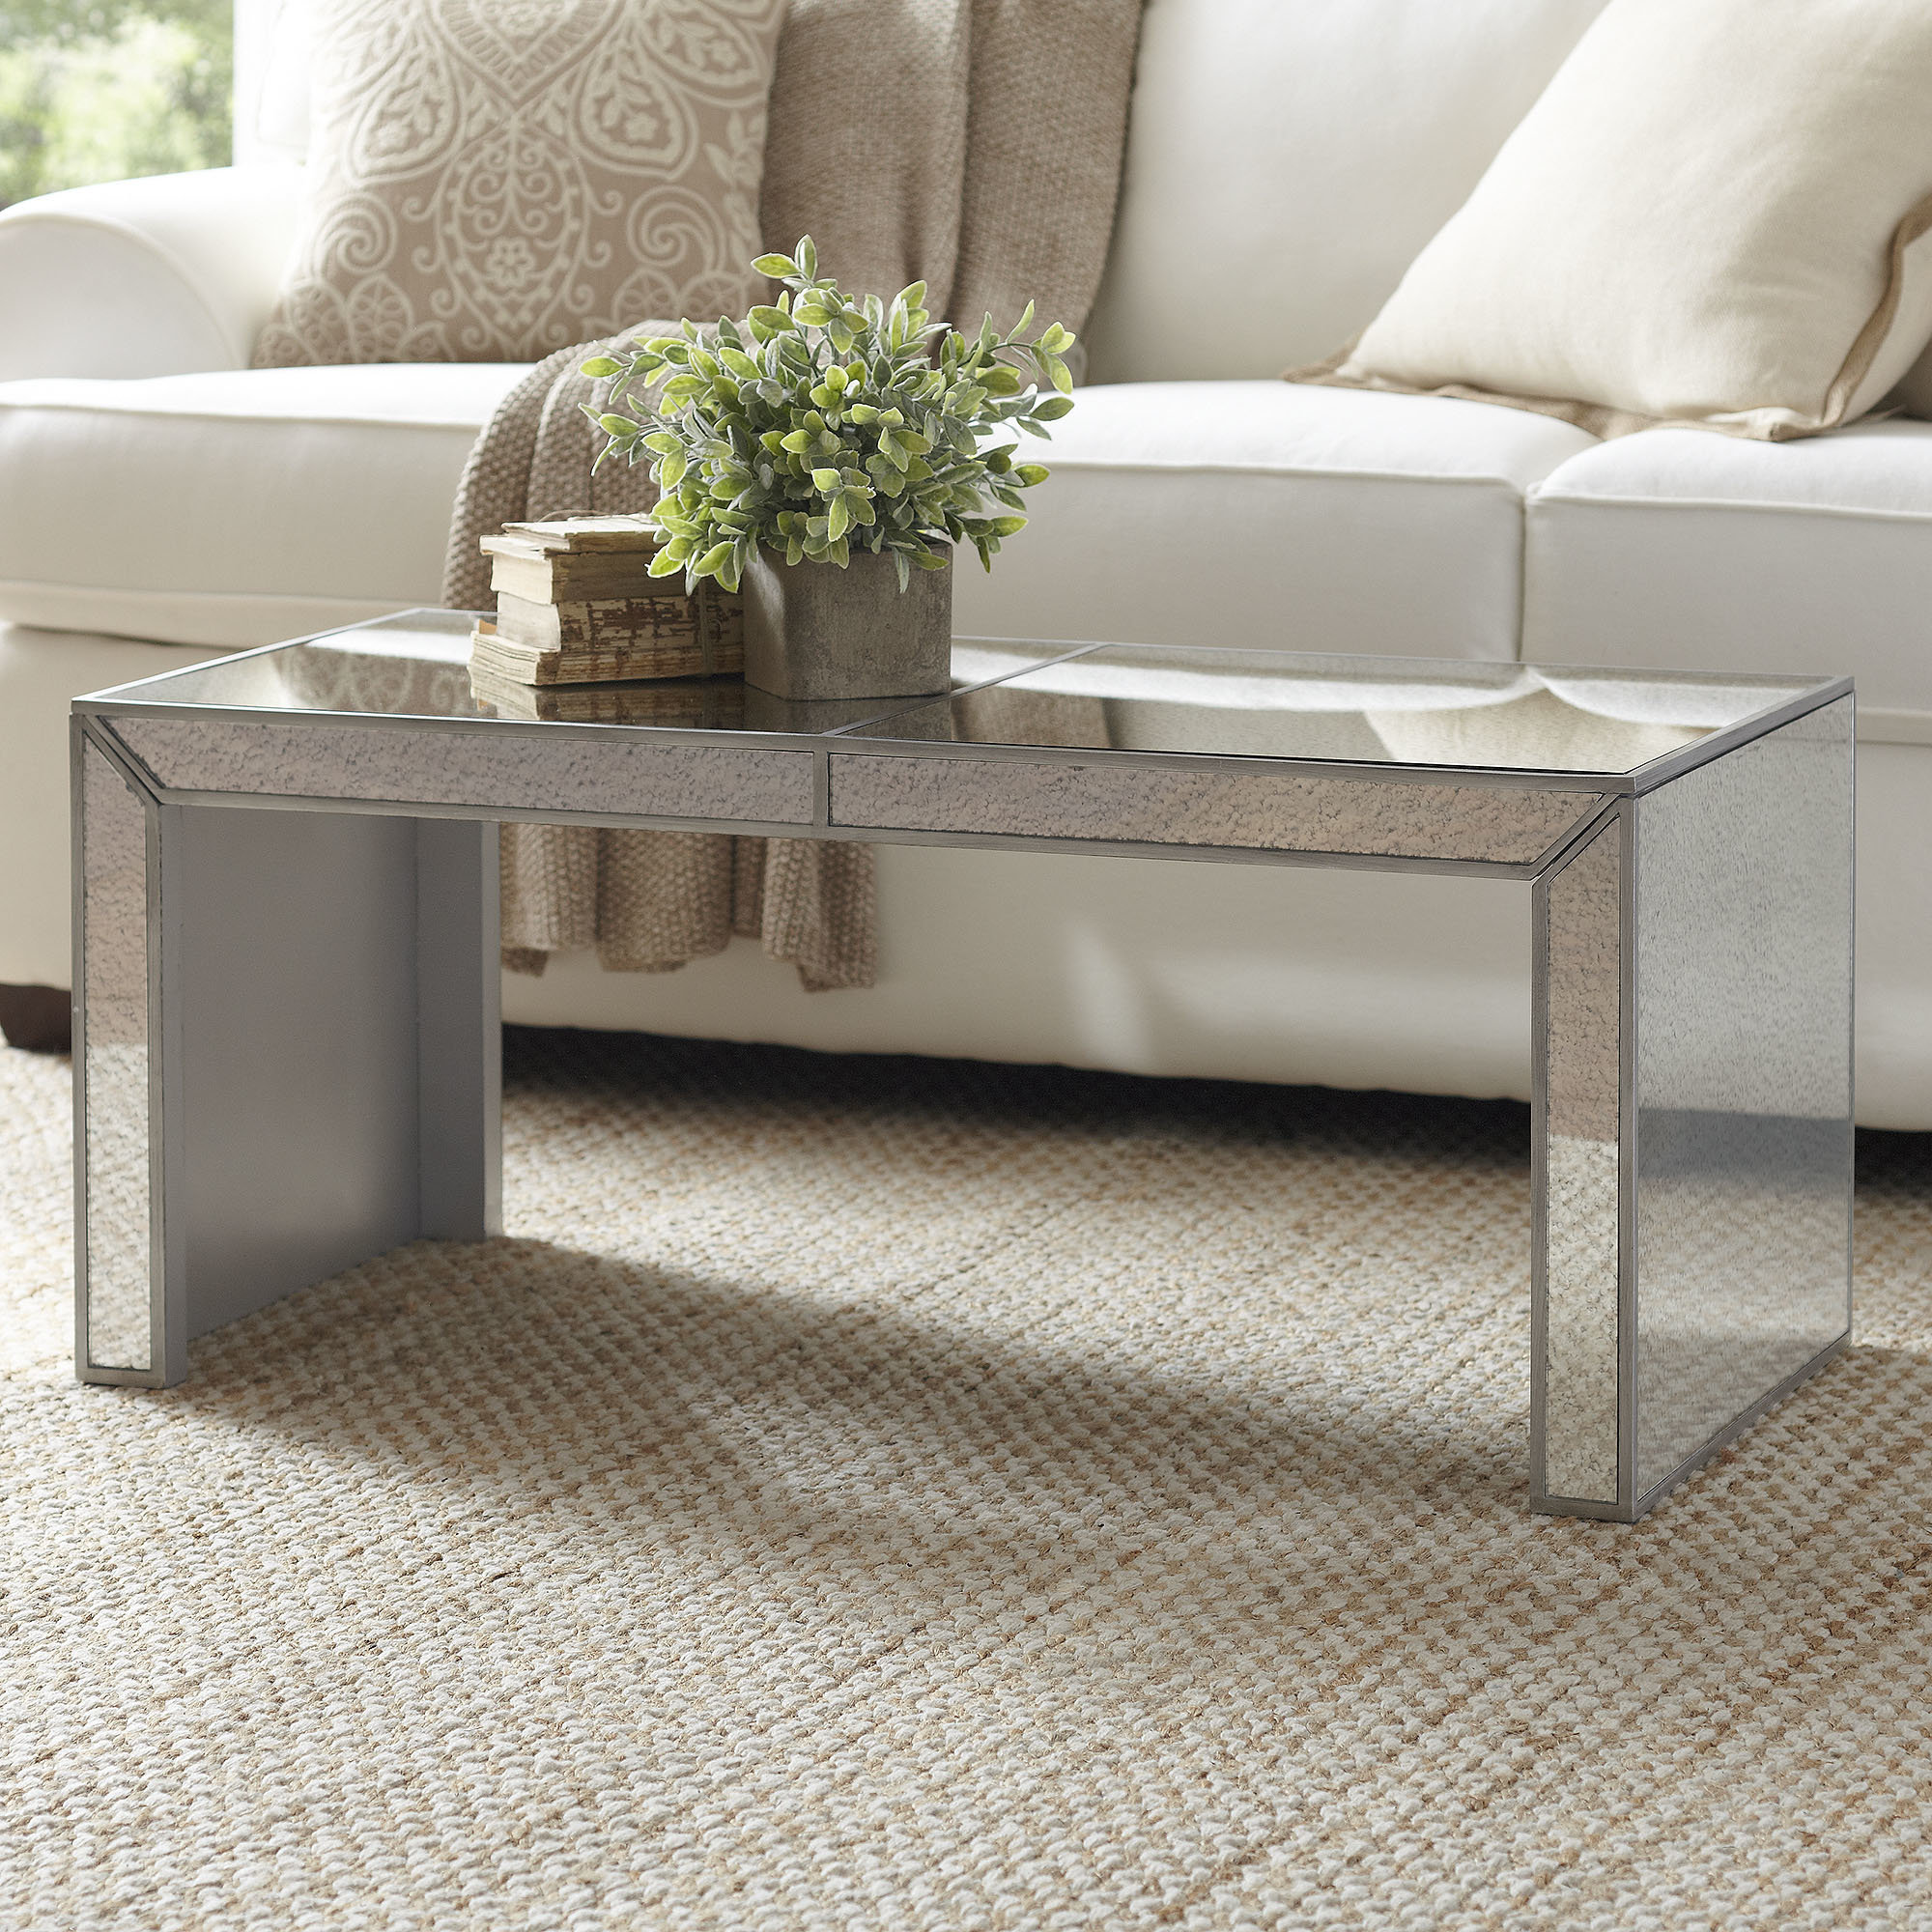 The Beautiful reflections of mirrored coffee table